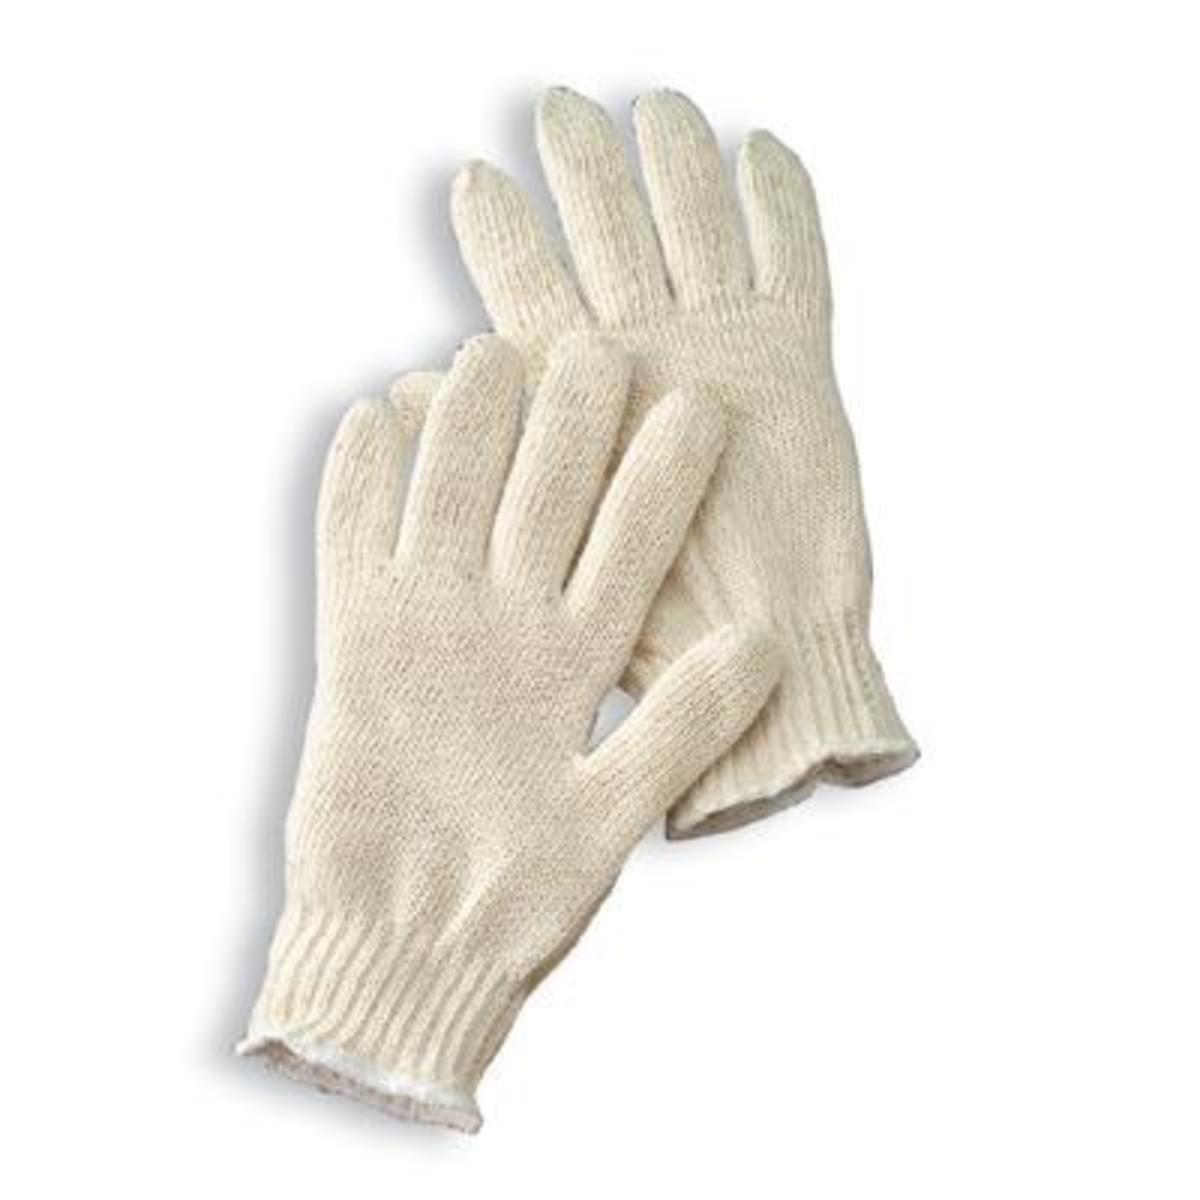 RADNOR® Natural Large Regular Weight Cotton Seamless Knit General Purpose Gloves With Knit Wrist